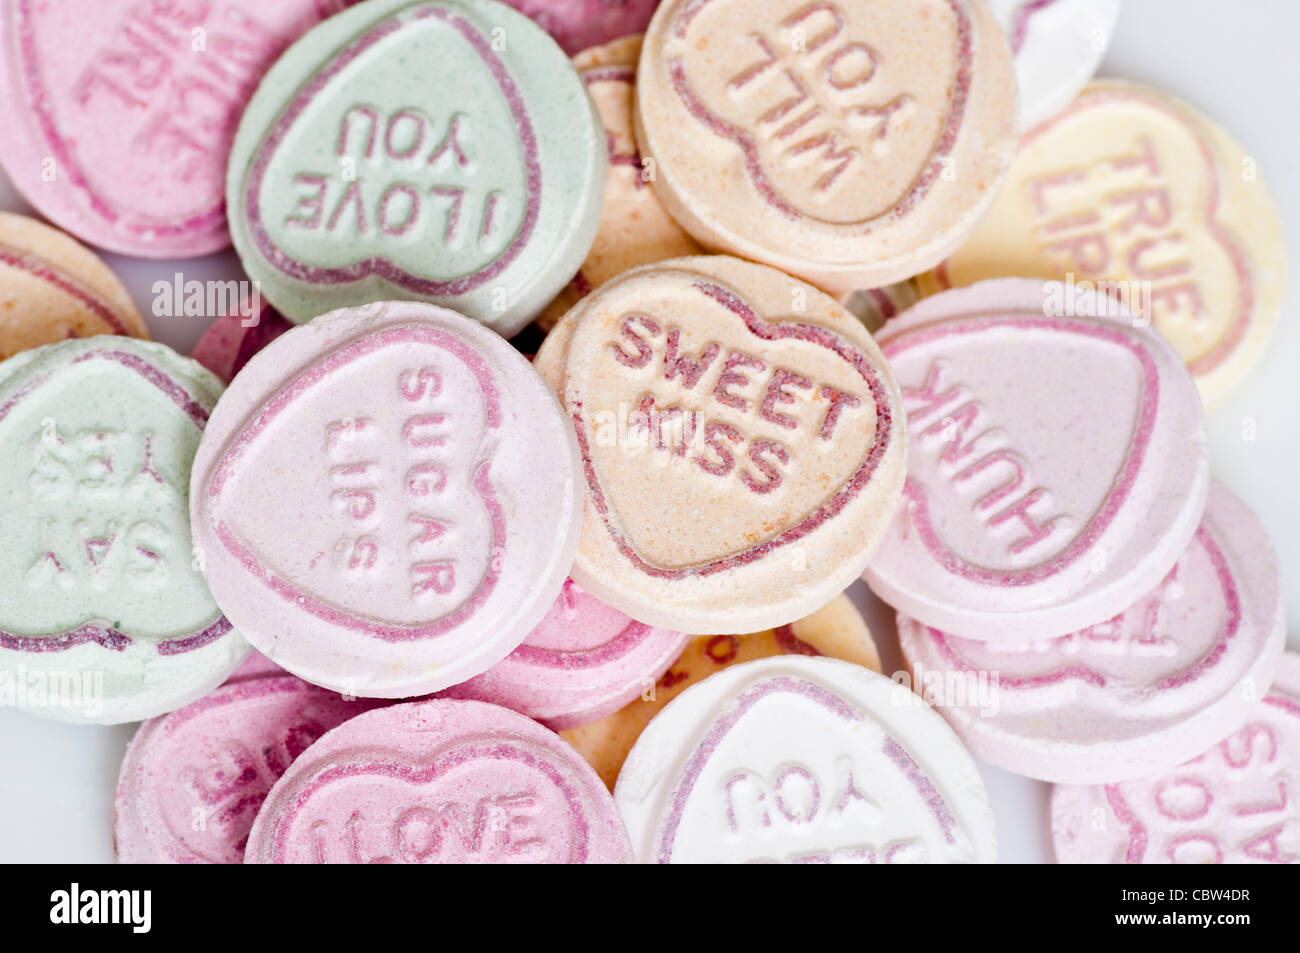 Love Hearts Sweets (Focus On The Top Sweets) Stock Photo